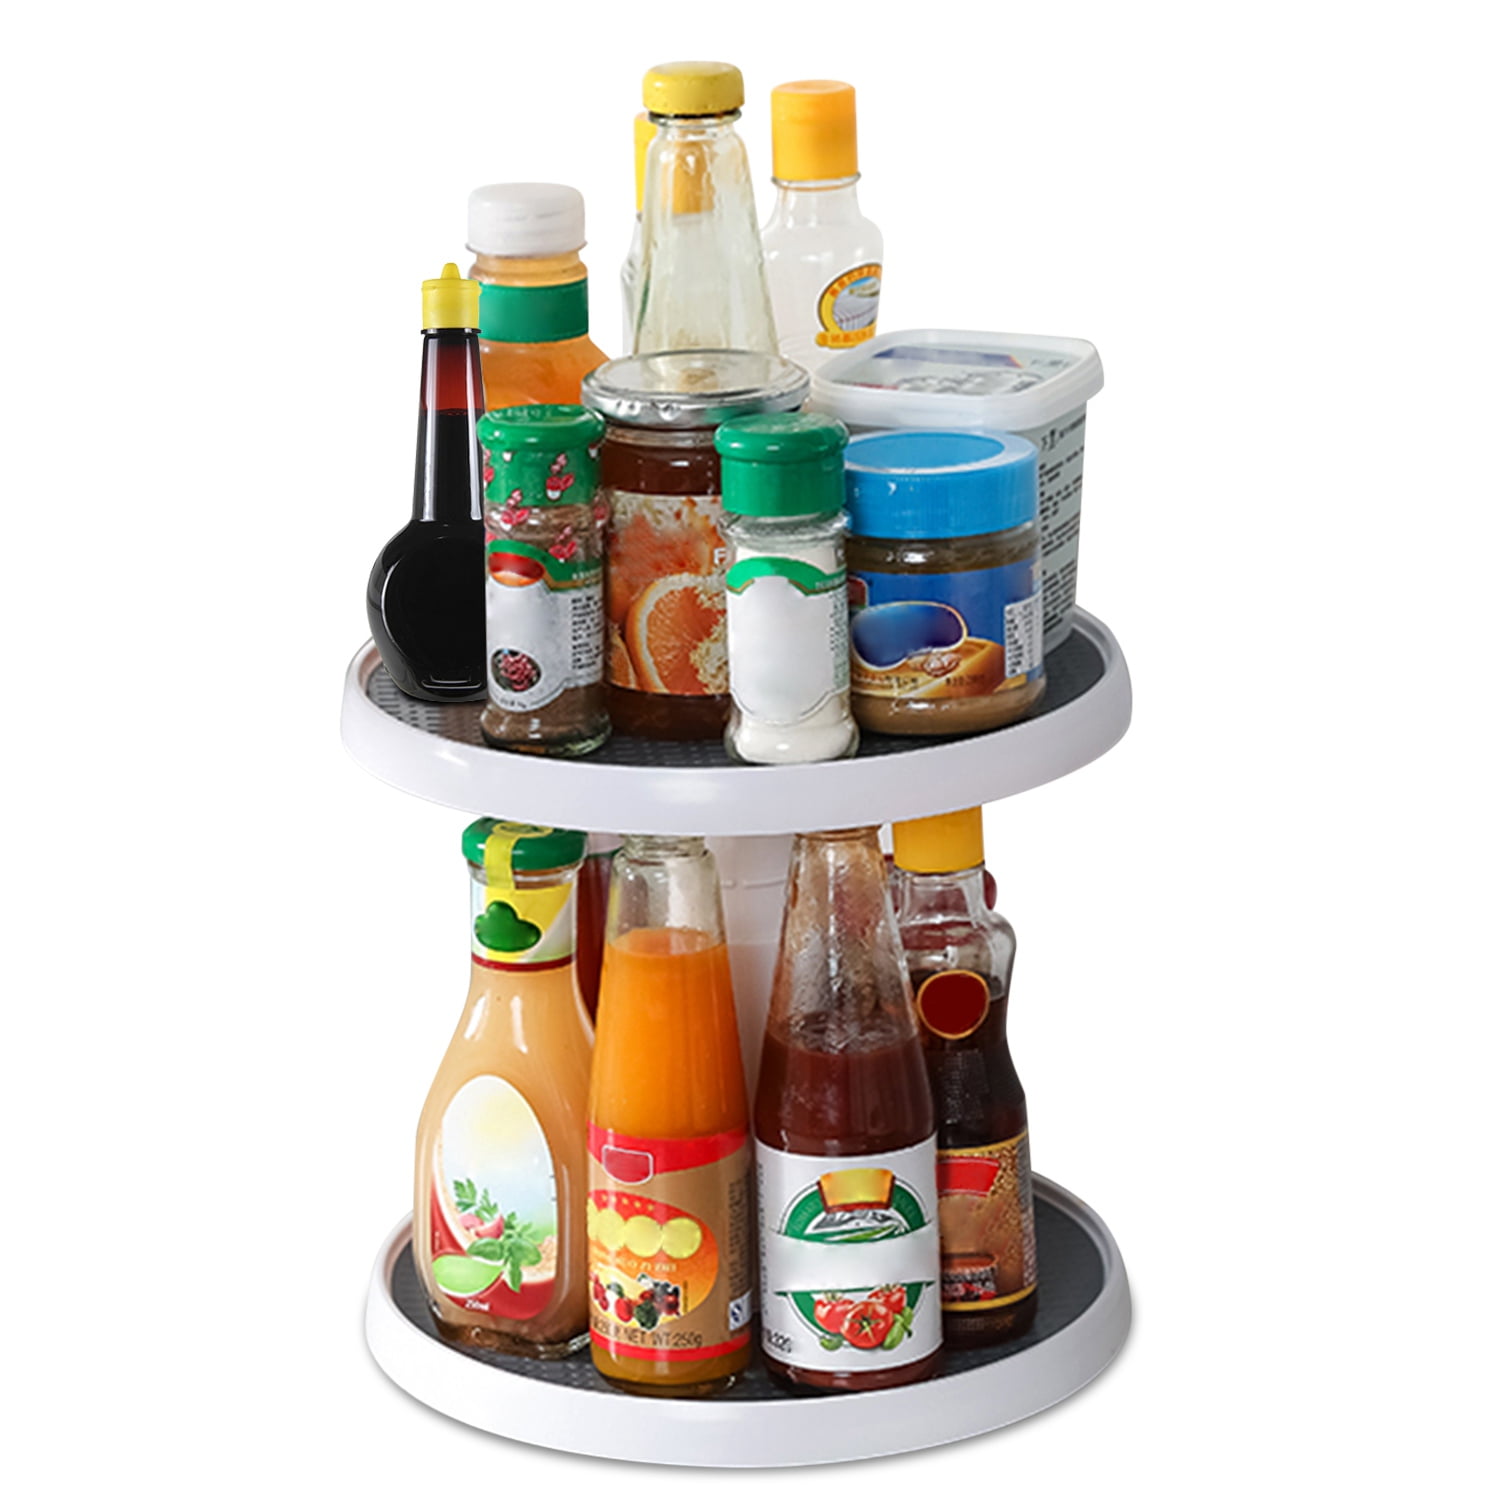 PHINOX Spice Rack Organizer for Cabinet, 2 Tier Lazy Susan, Lazy